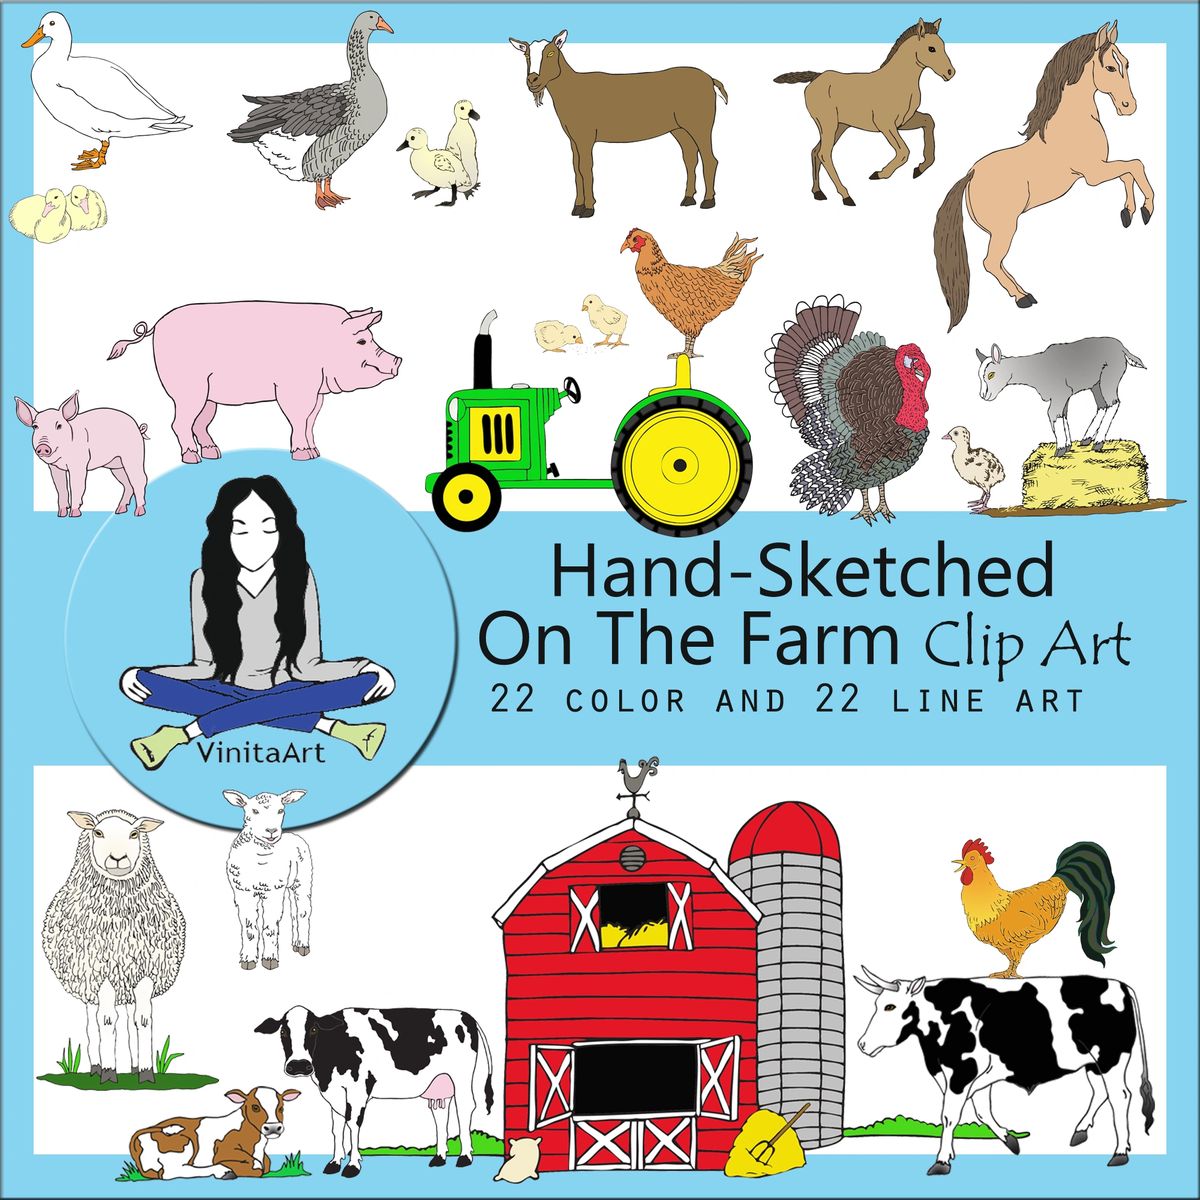 Animals on the Farm clip art, 22 color and 22 black and white images